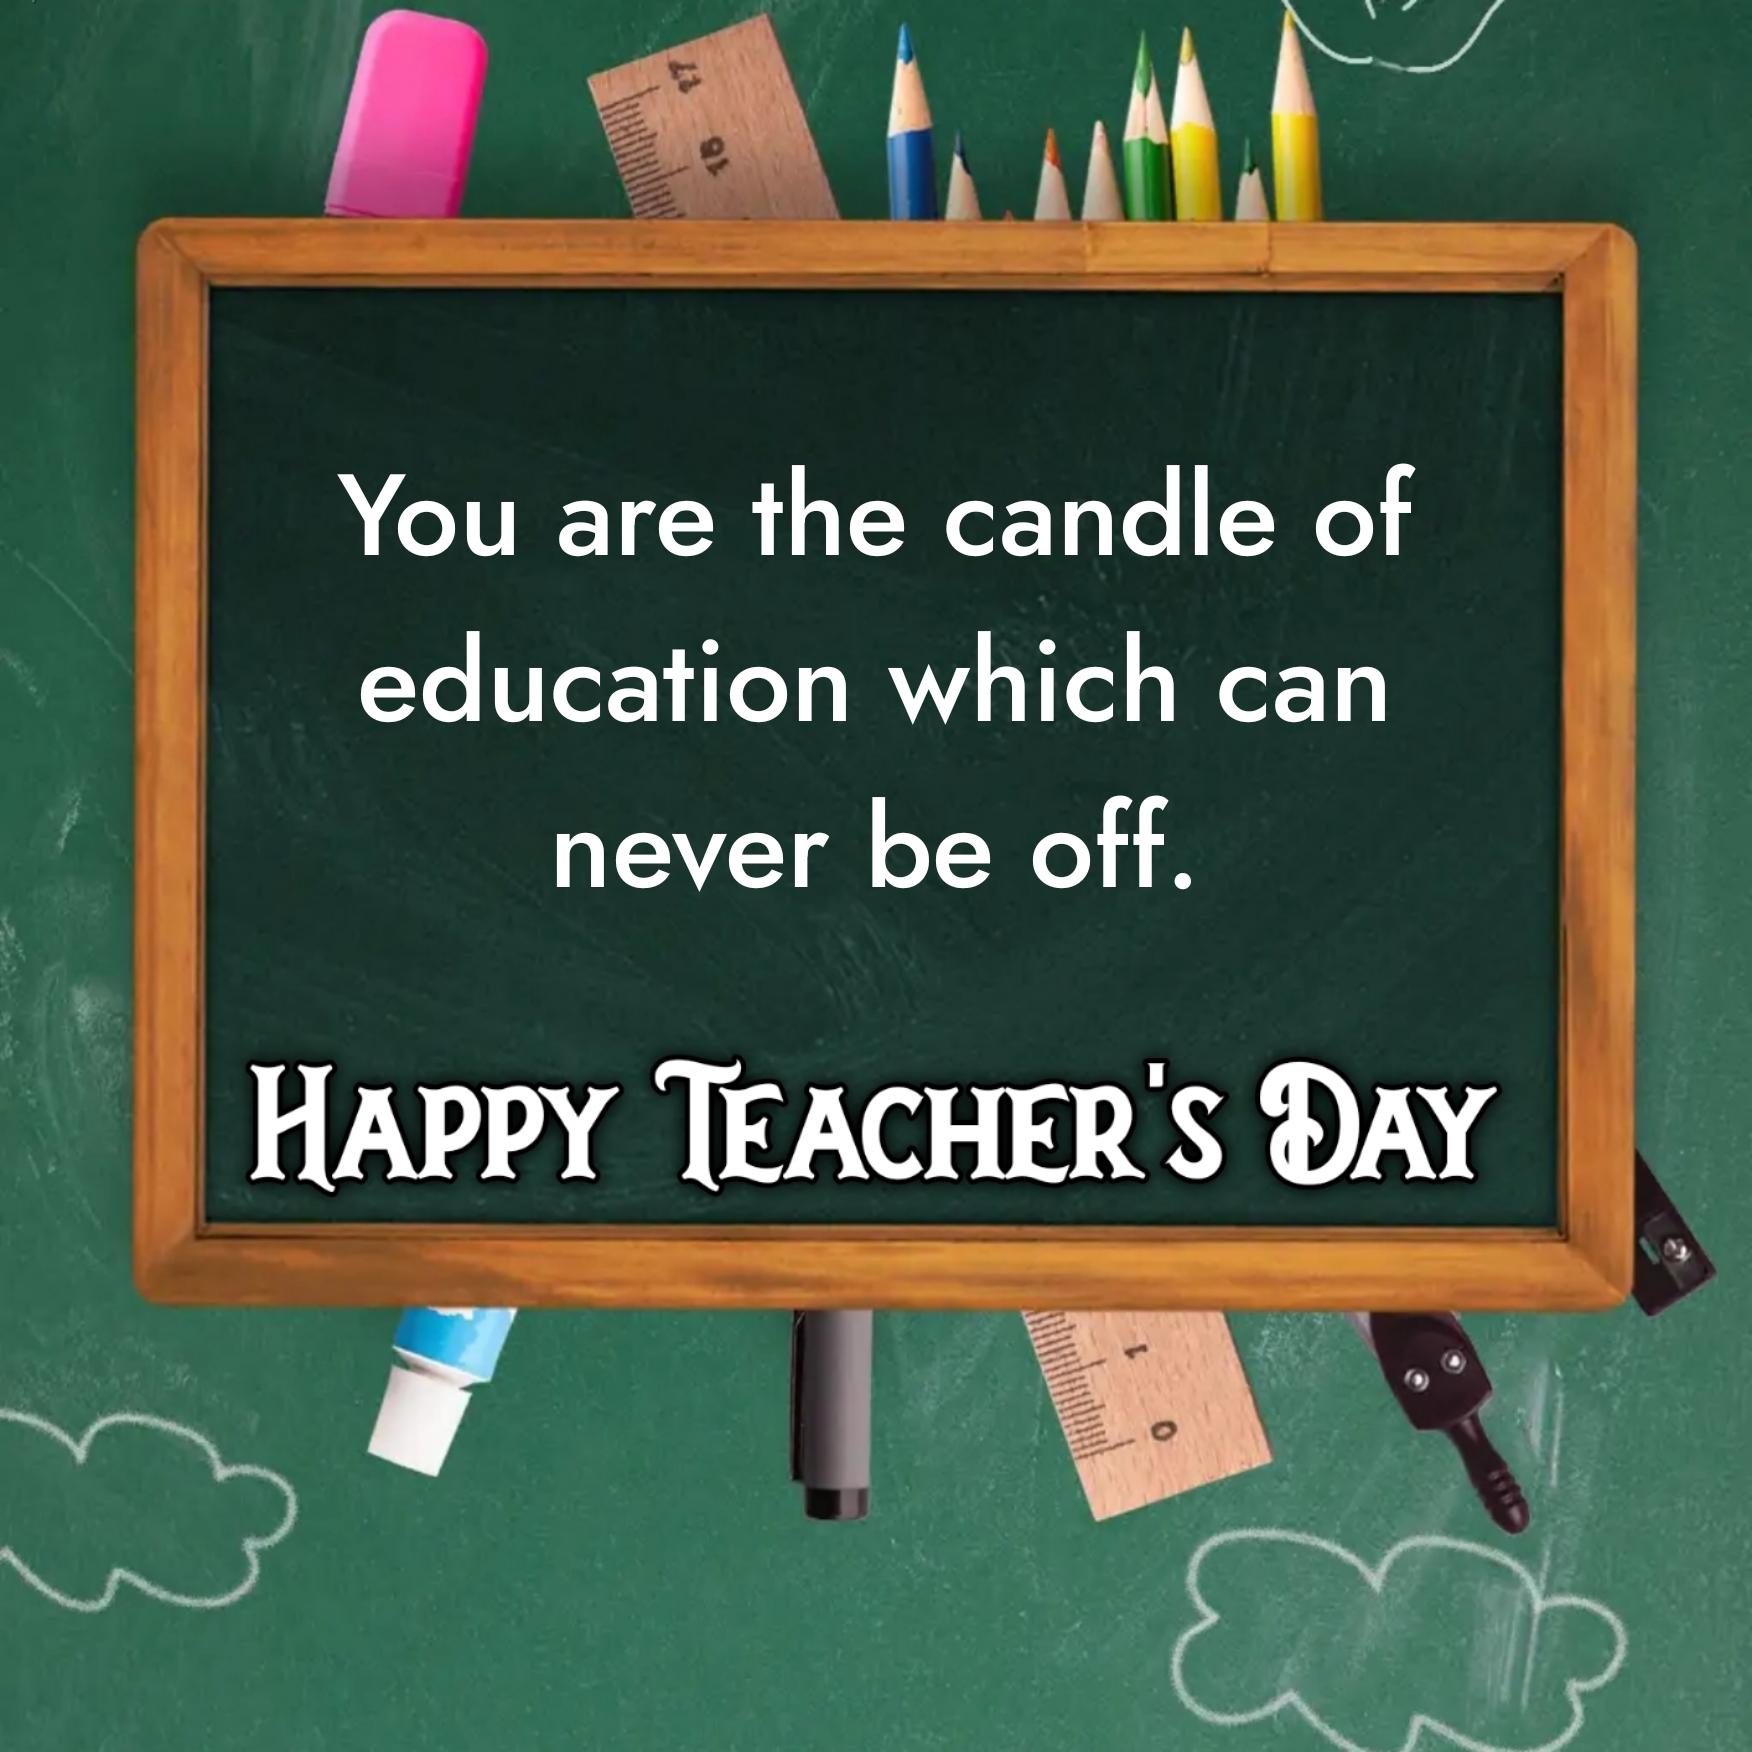 You are the candle of education which can never be off